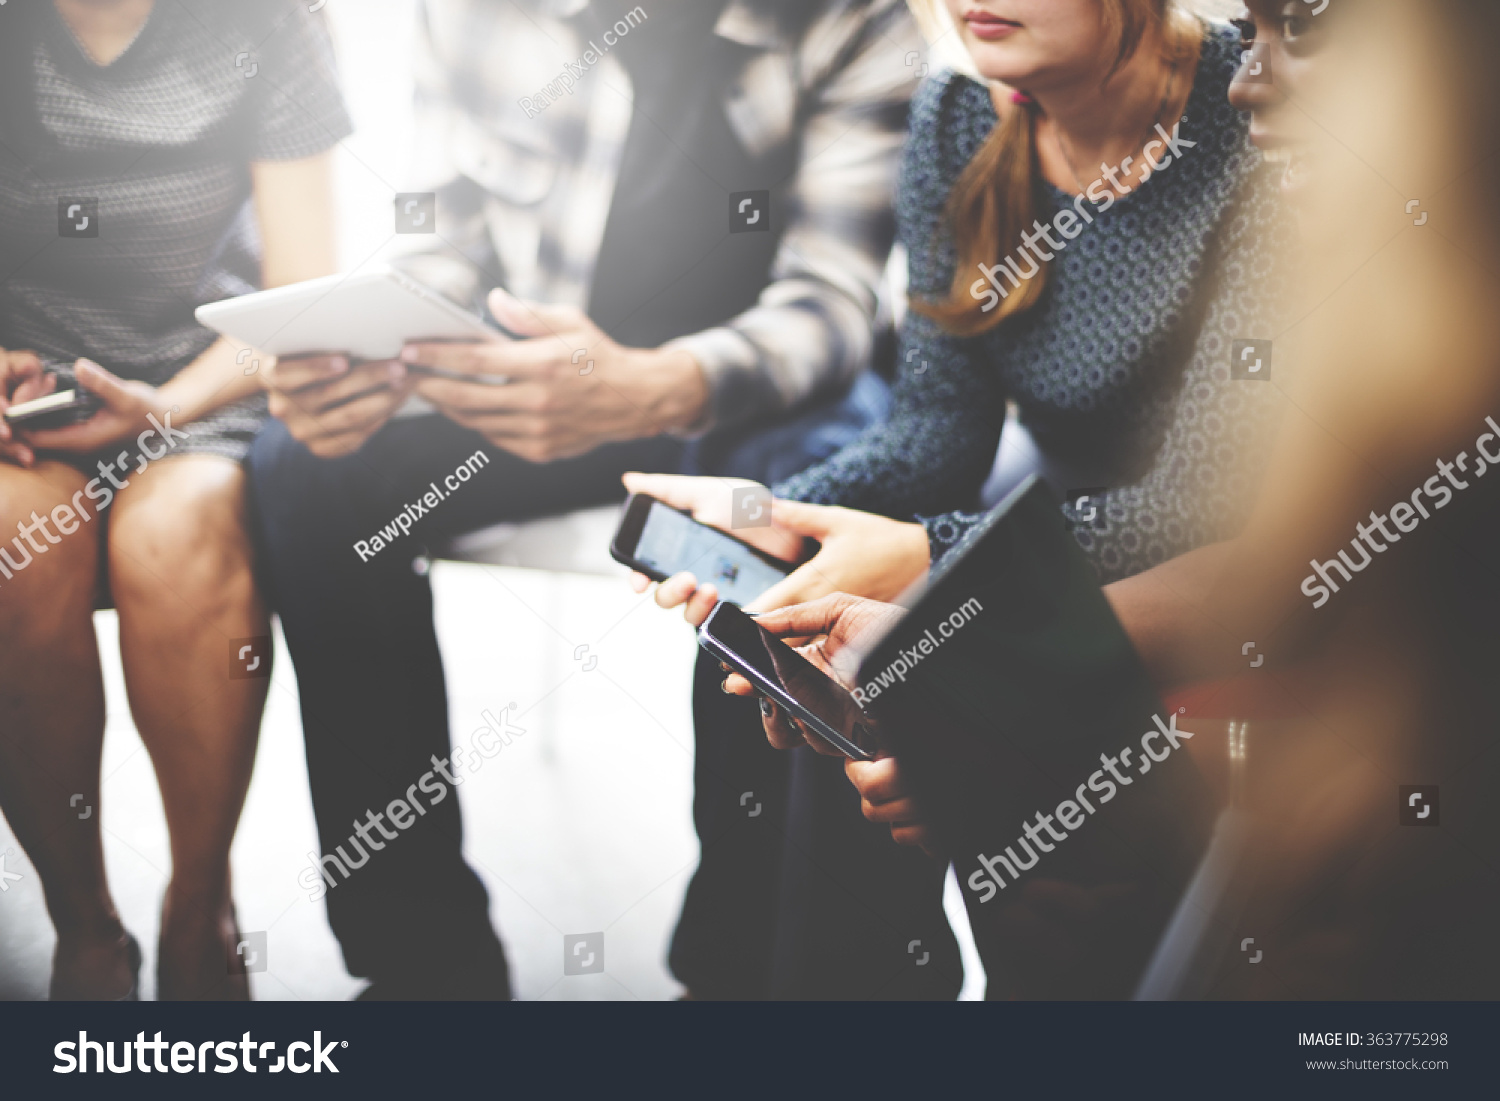 Business Team Digital Device Technology Connecting Concept